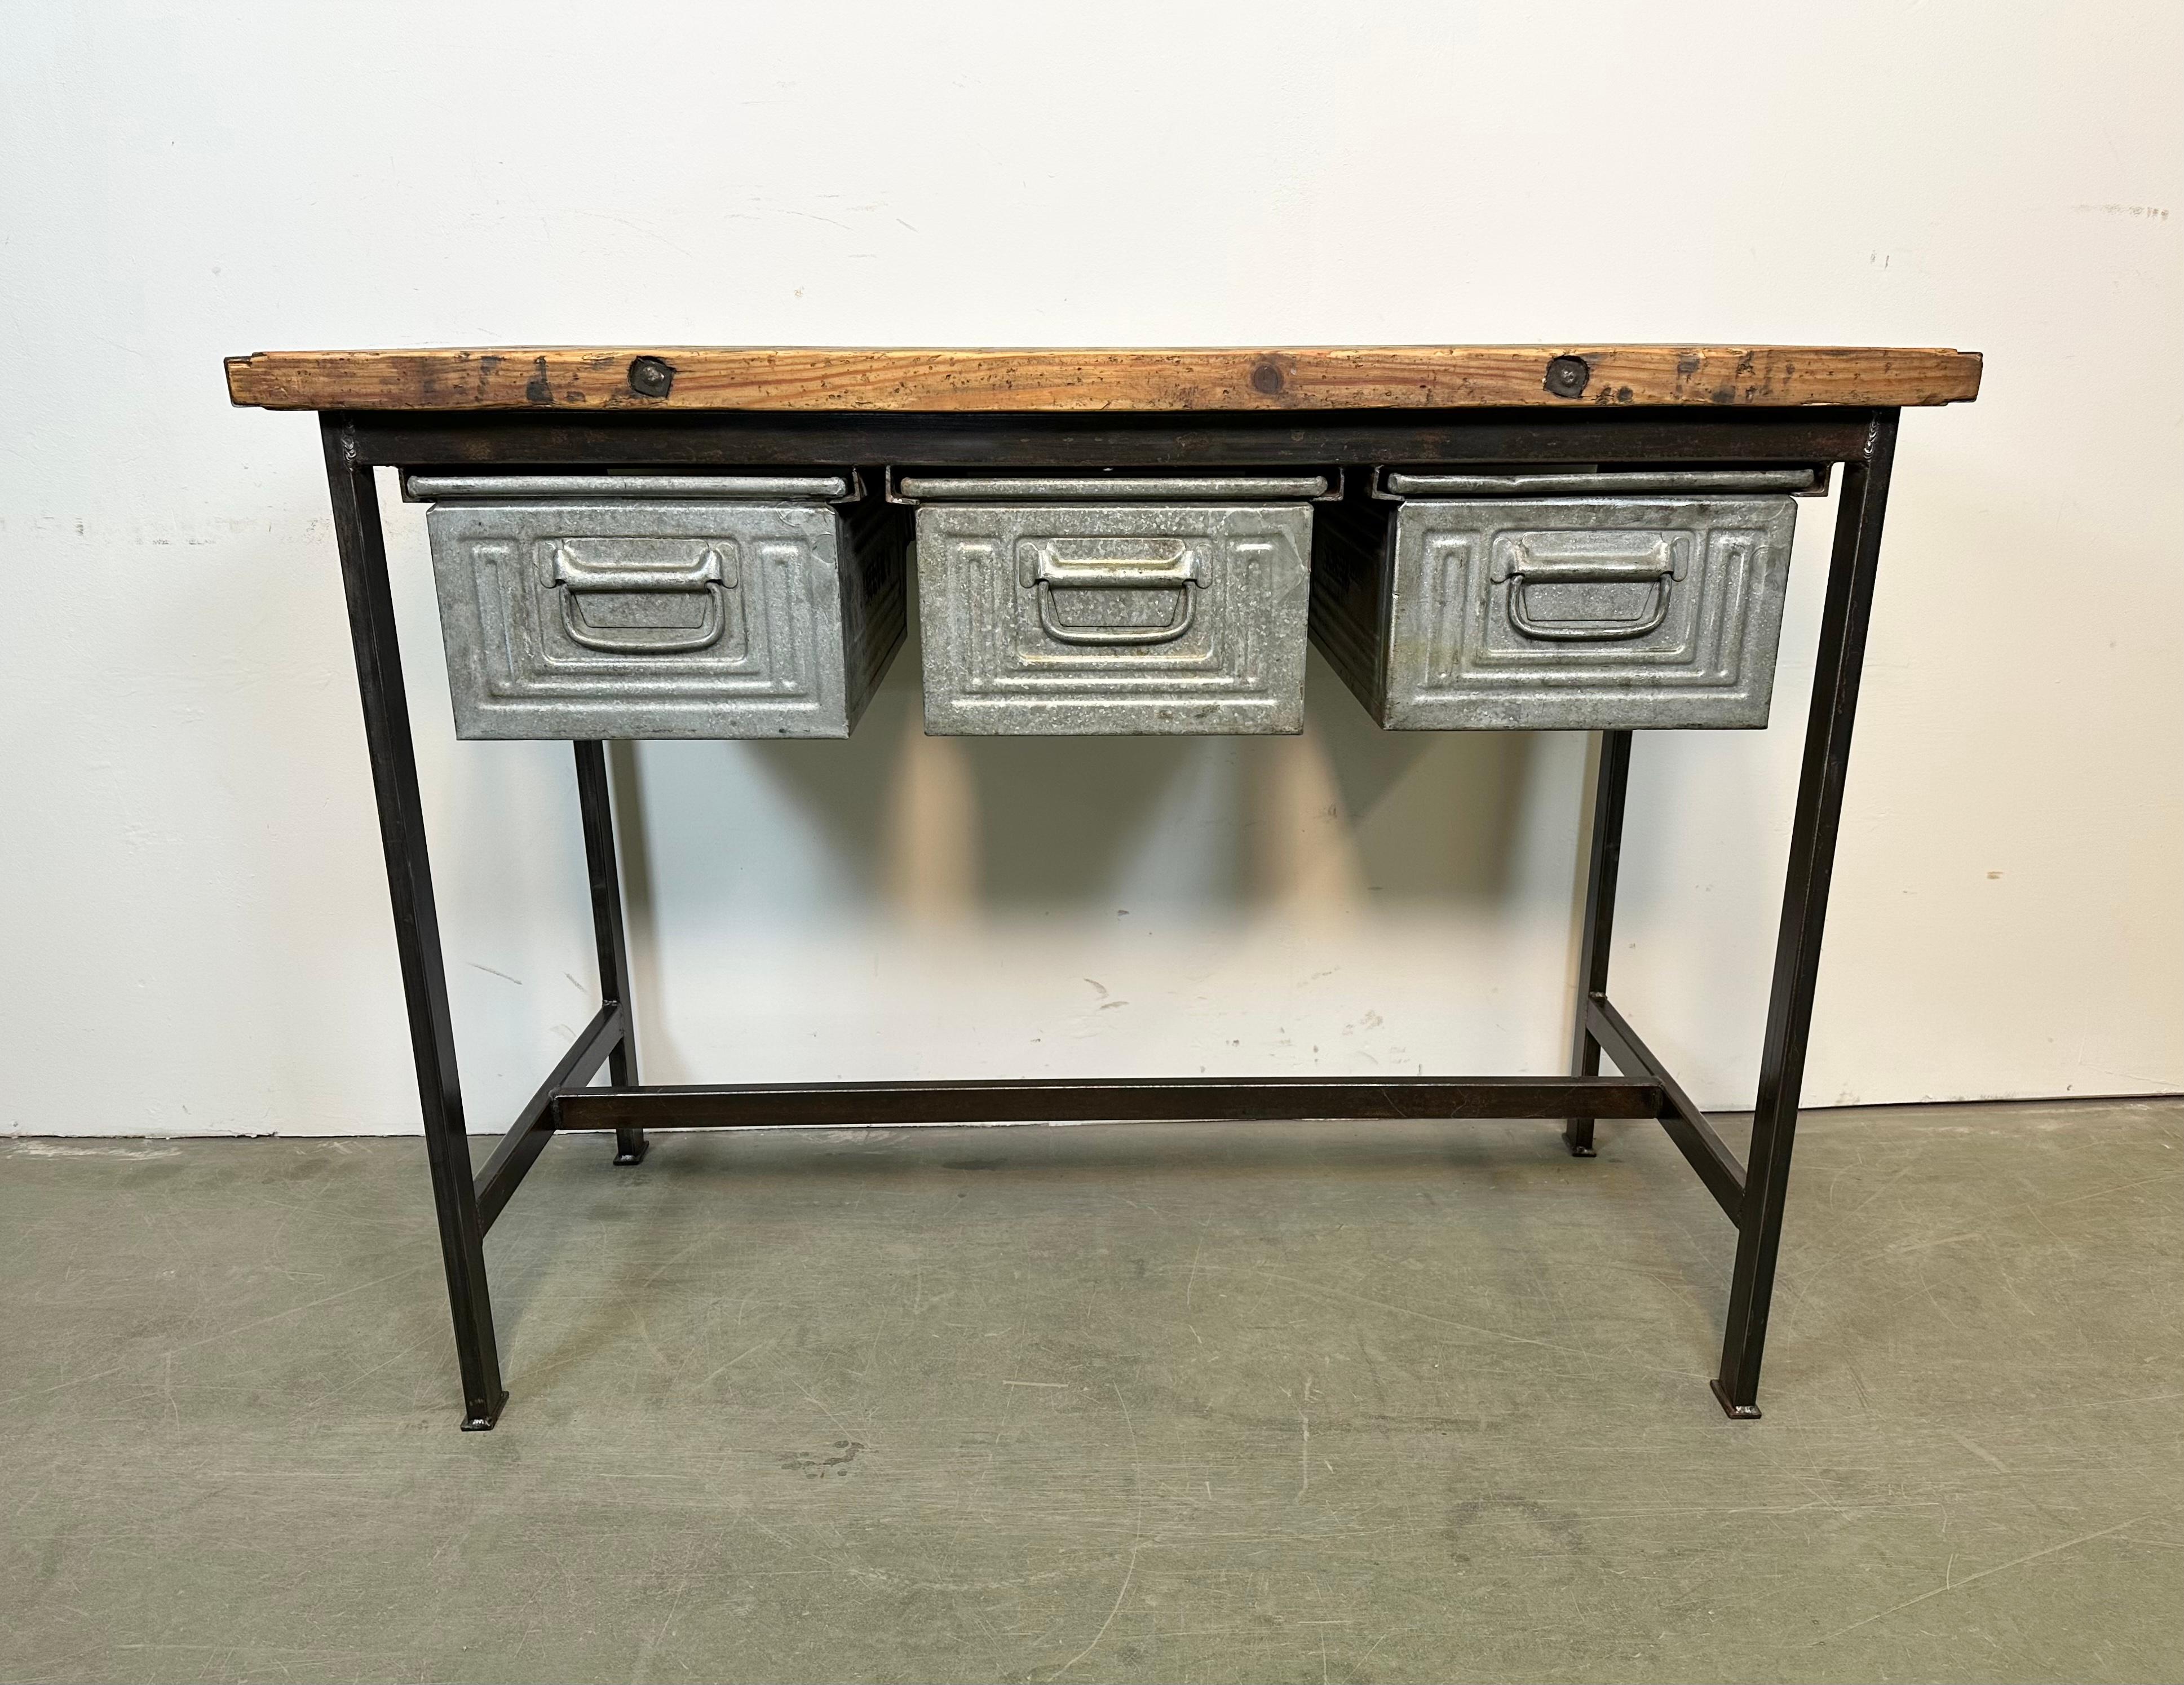 Vintage industrial worktable from the 1960s. It features a black iron construction, solid wooden plate and three silver iron drawers. Weight: 47 kg.
Drawer dimensions:
Width: 32 cm
Depth: 50 cm
Height: 20 cm.